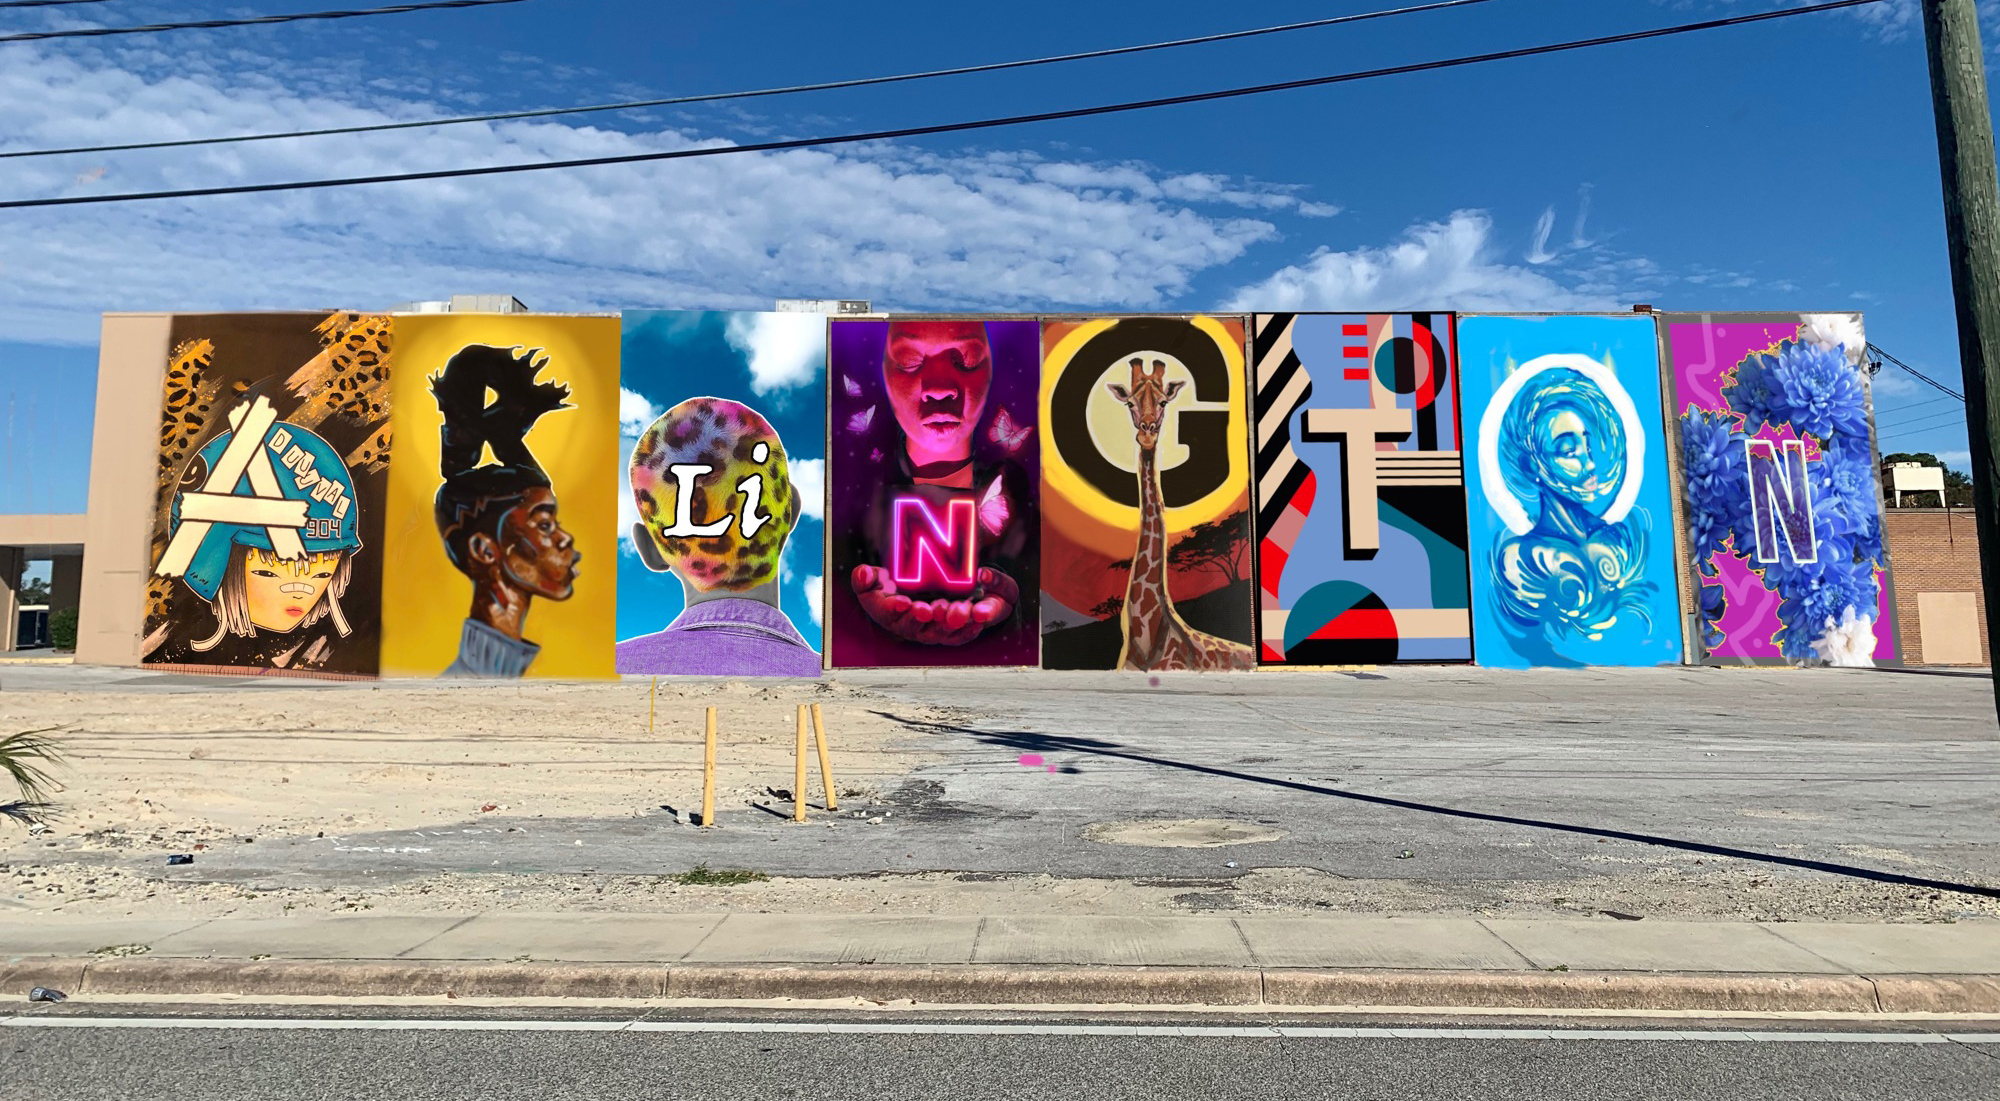 Jacksonville artists created an eight-panel mural in early 2020 at College Park.